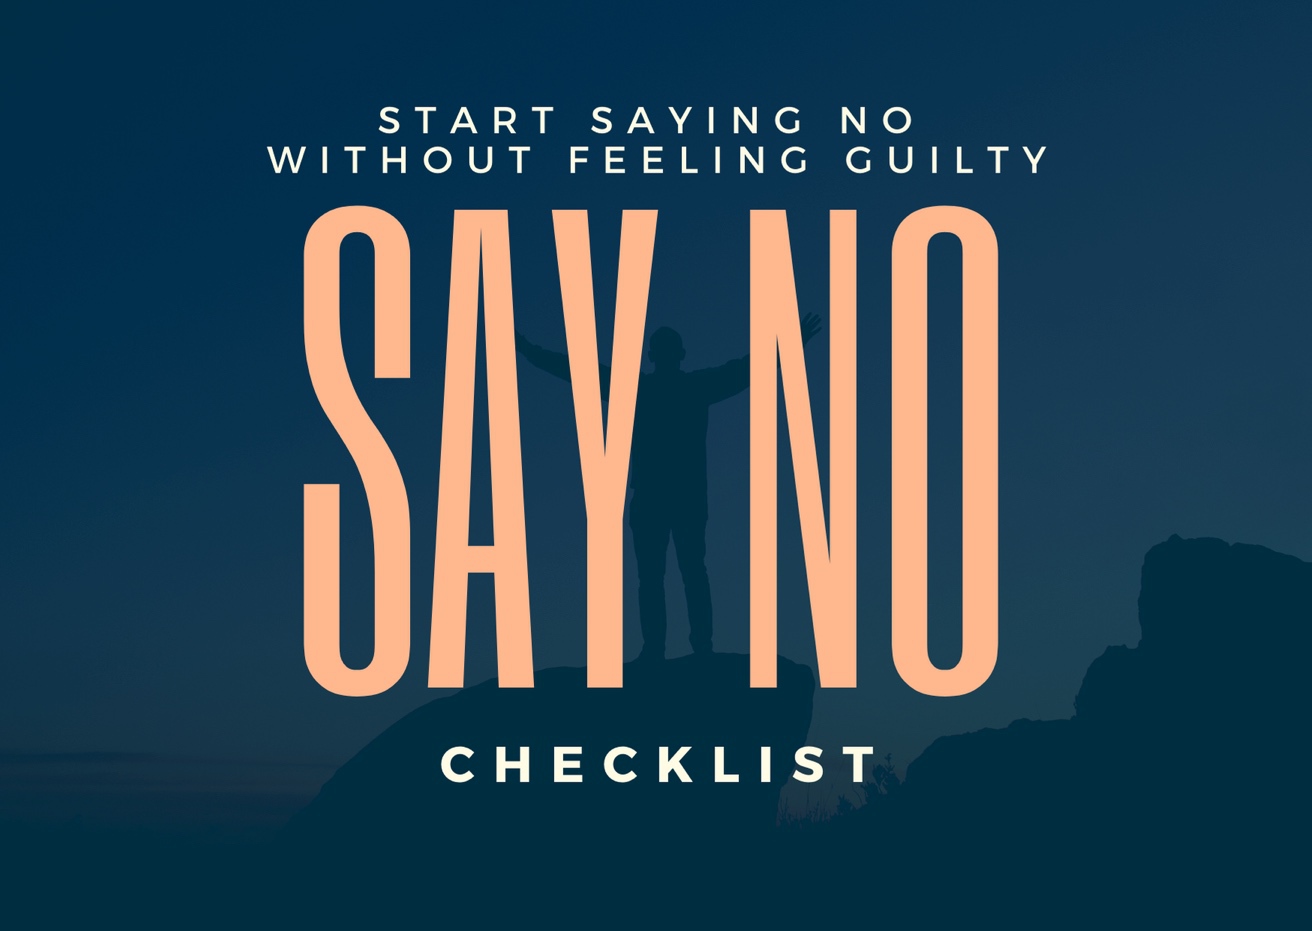 This checklist includes 8 steps to start saying no 12 must-dos to stop - photo 2